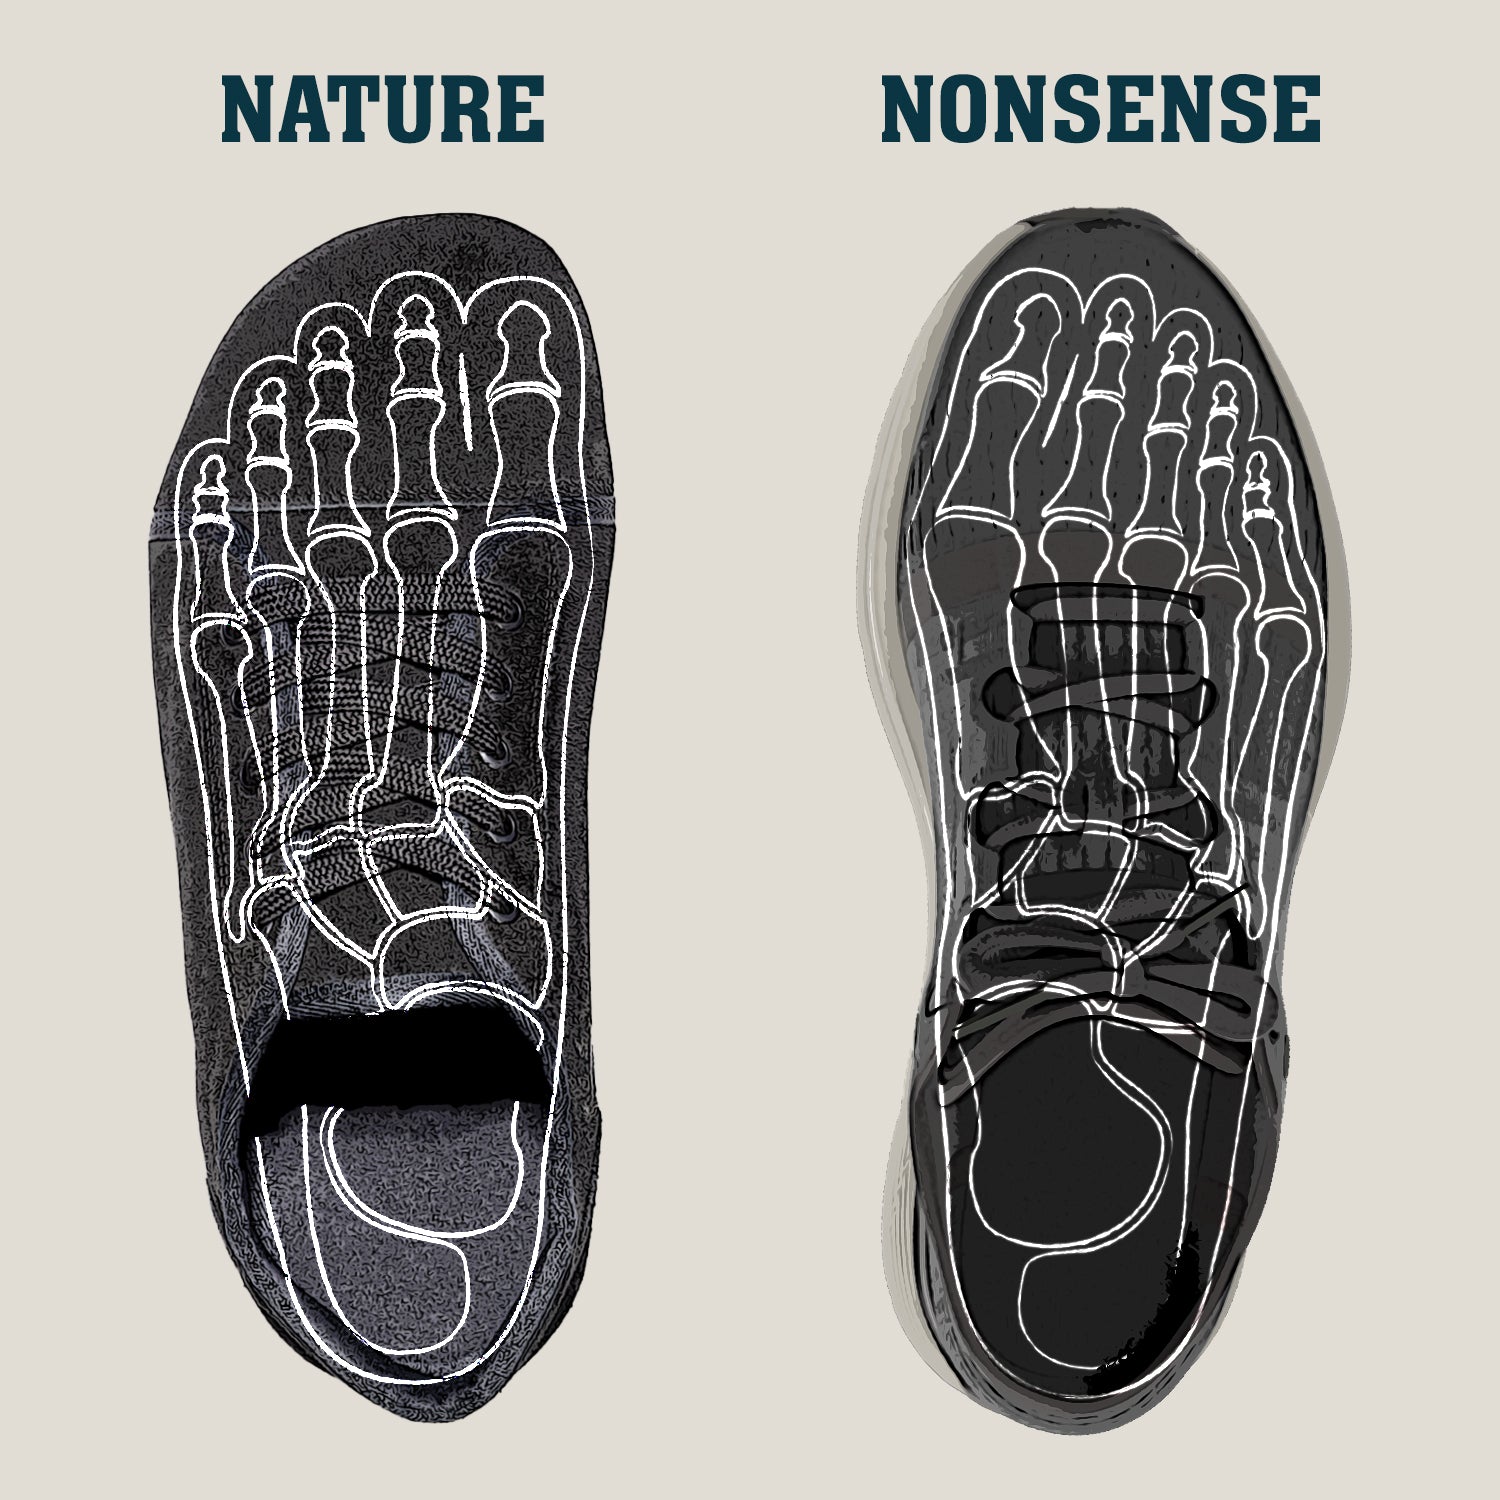 Naboso Insoles Review